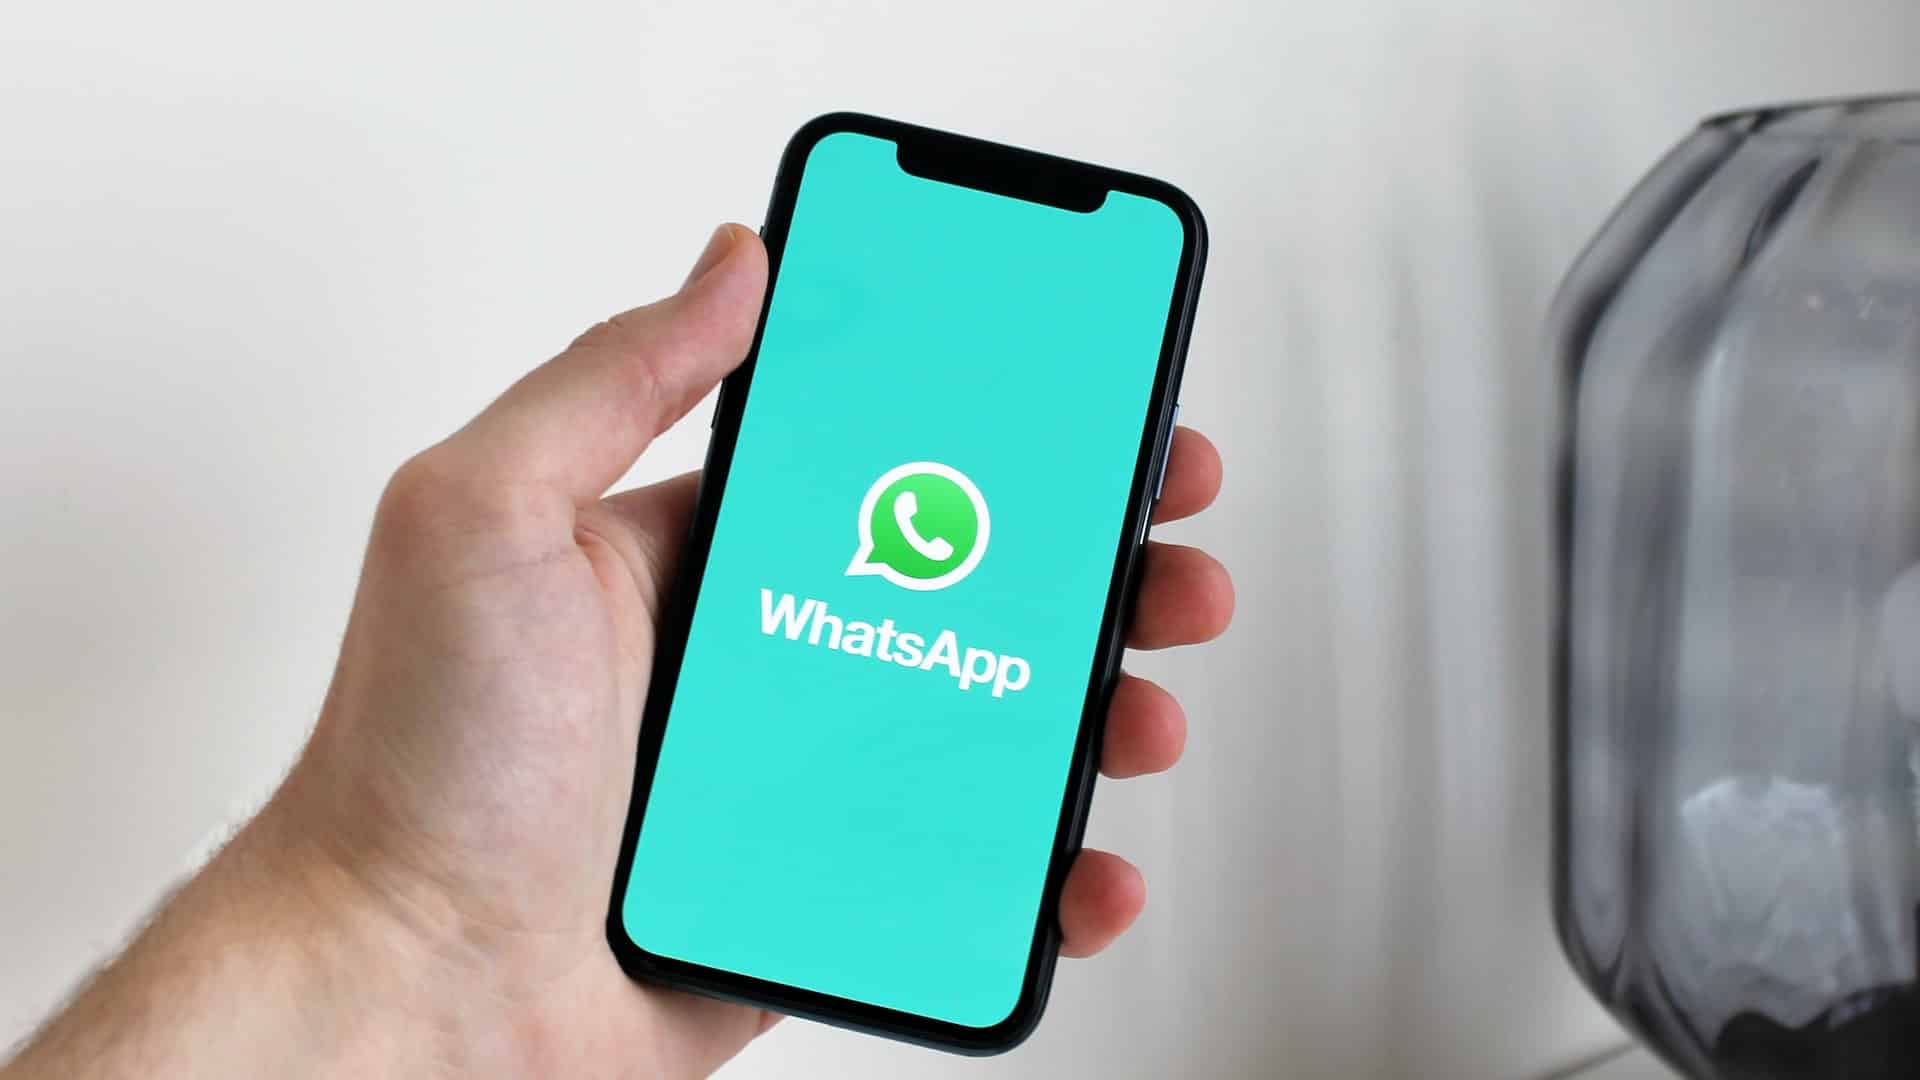 WhatsApp iOS Beta Users May Soon Be Able to Add Voice Notes to Status, and Other Updates